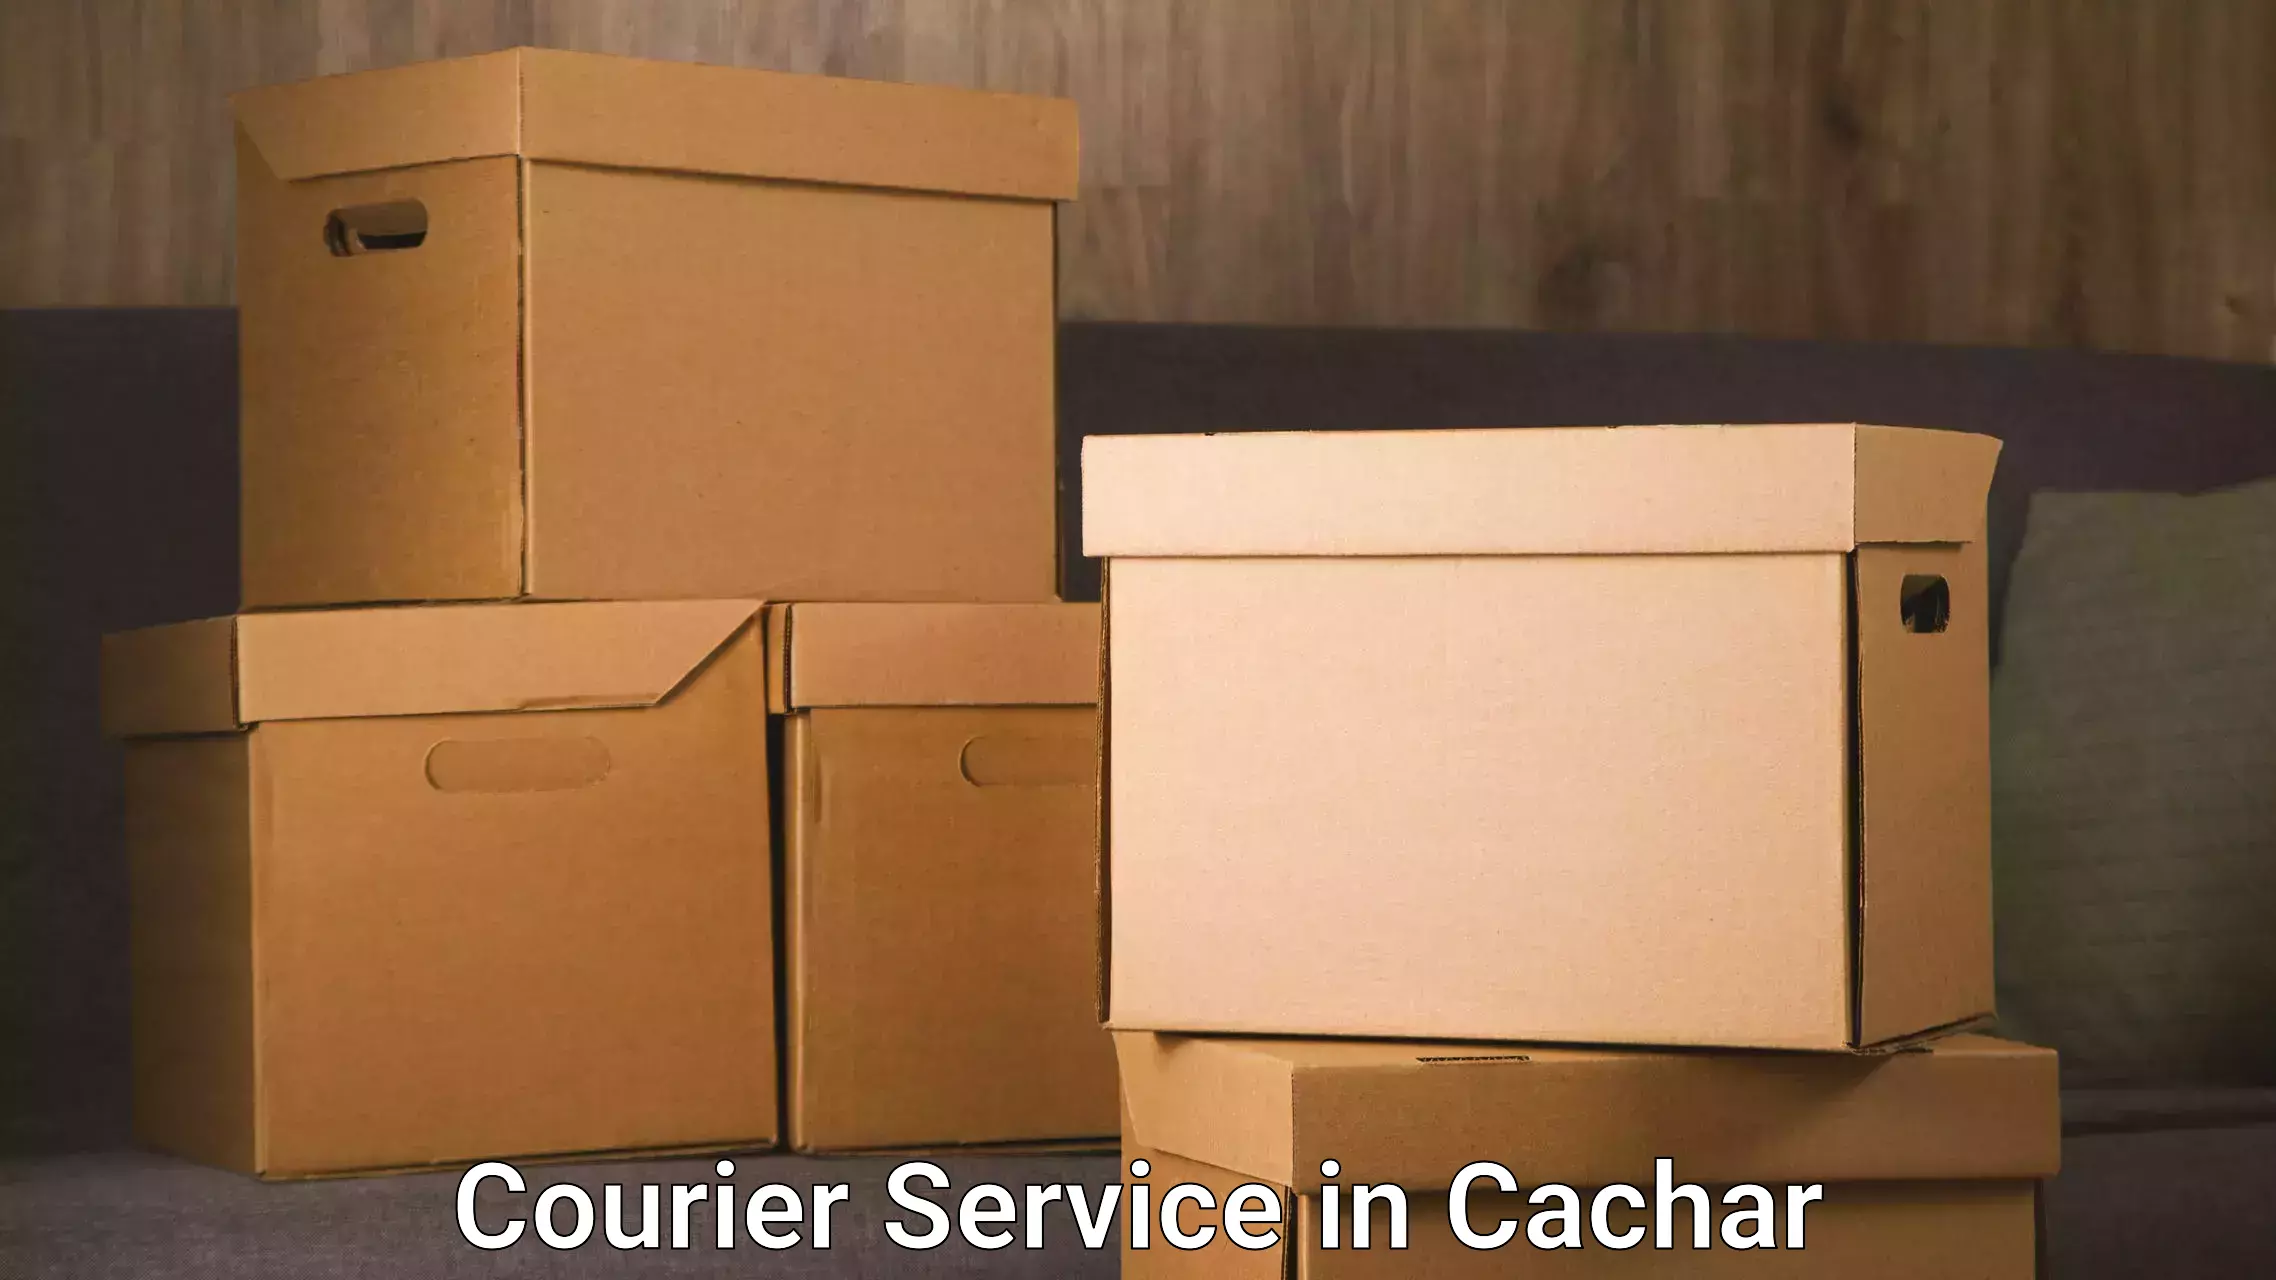 Cash on delivery service in Cachar